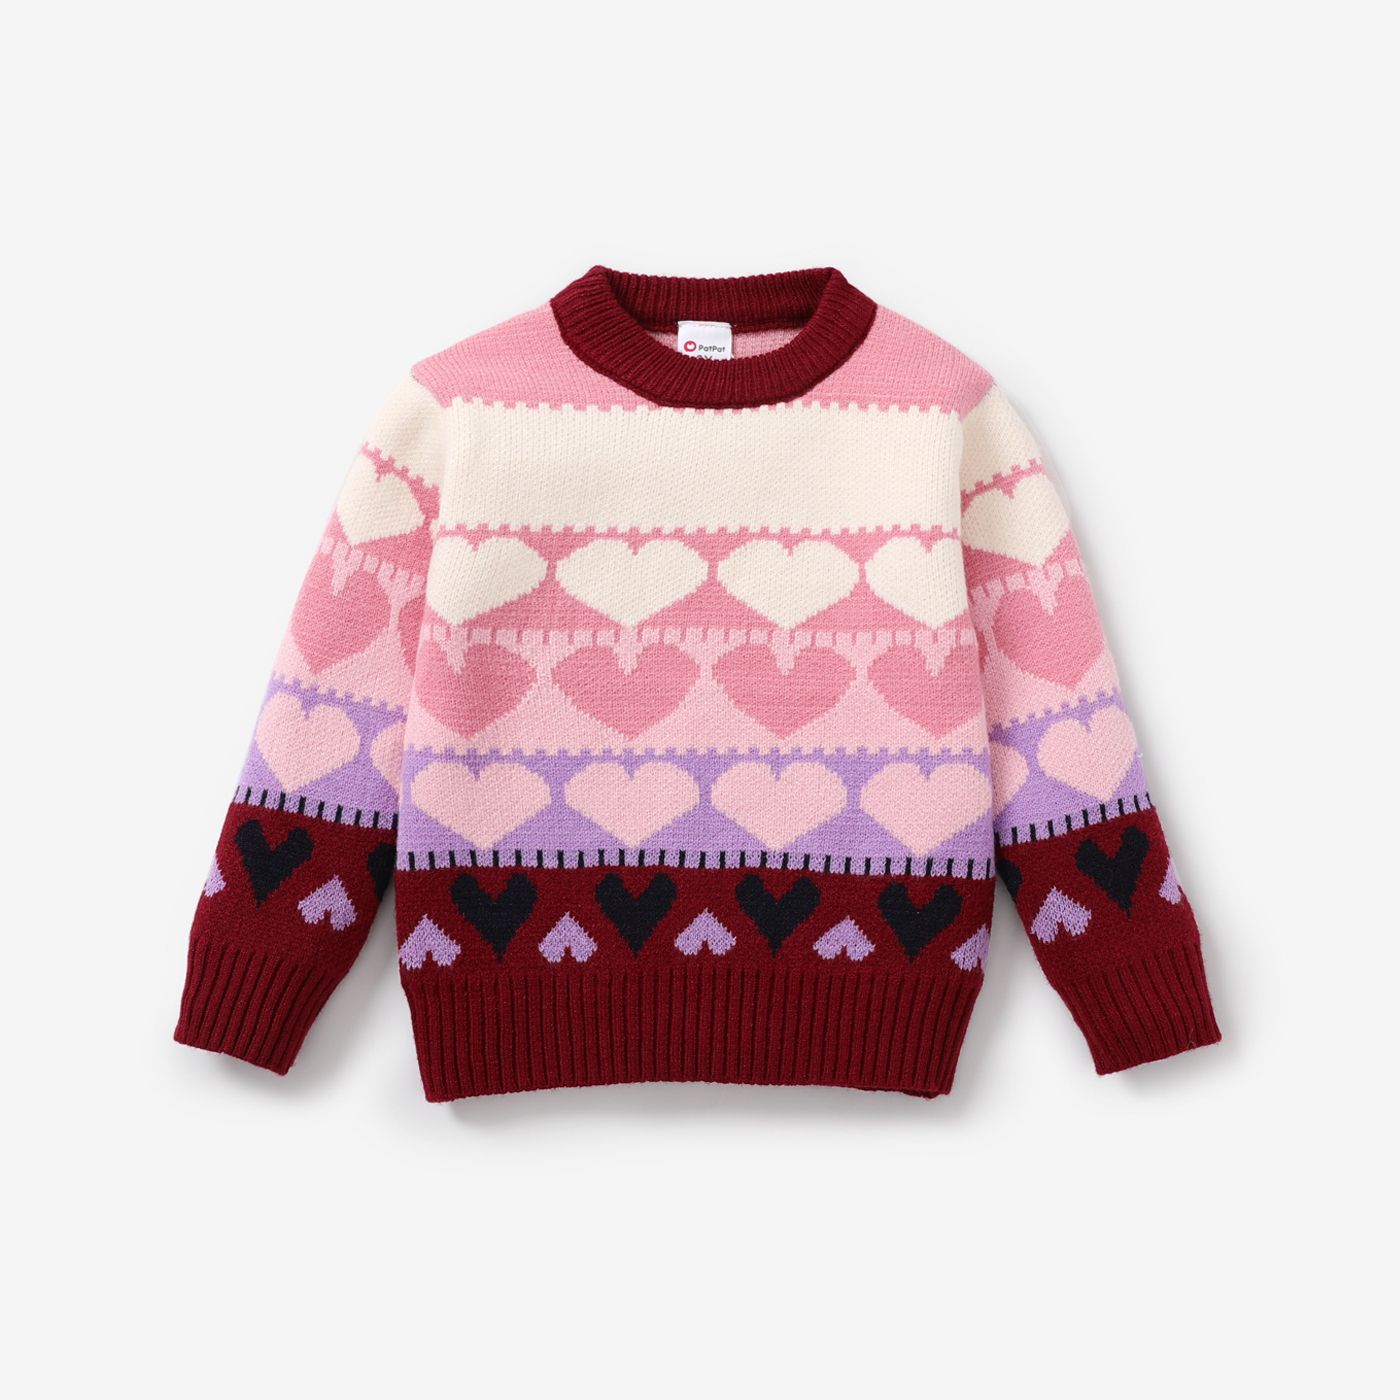 Toddler Girl Sweet Heart-shaped Top/Pull